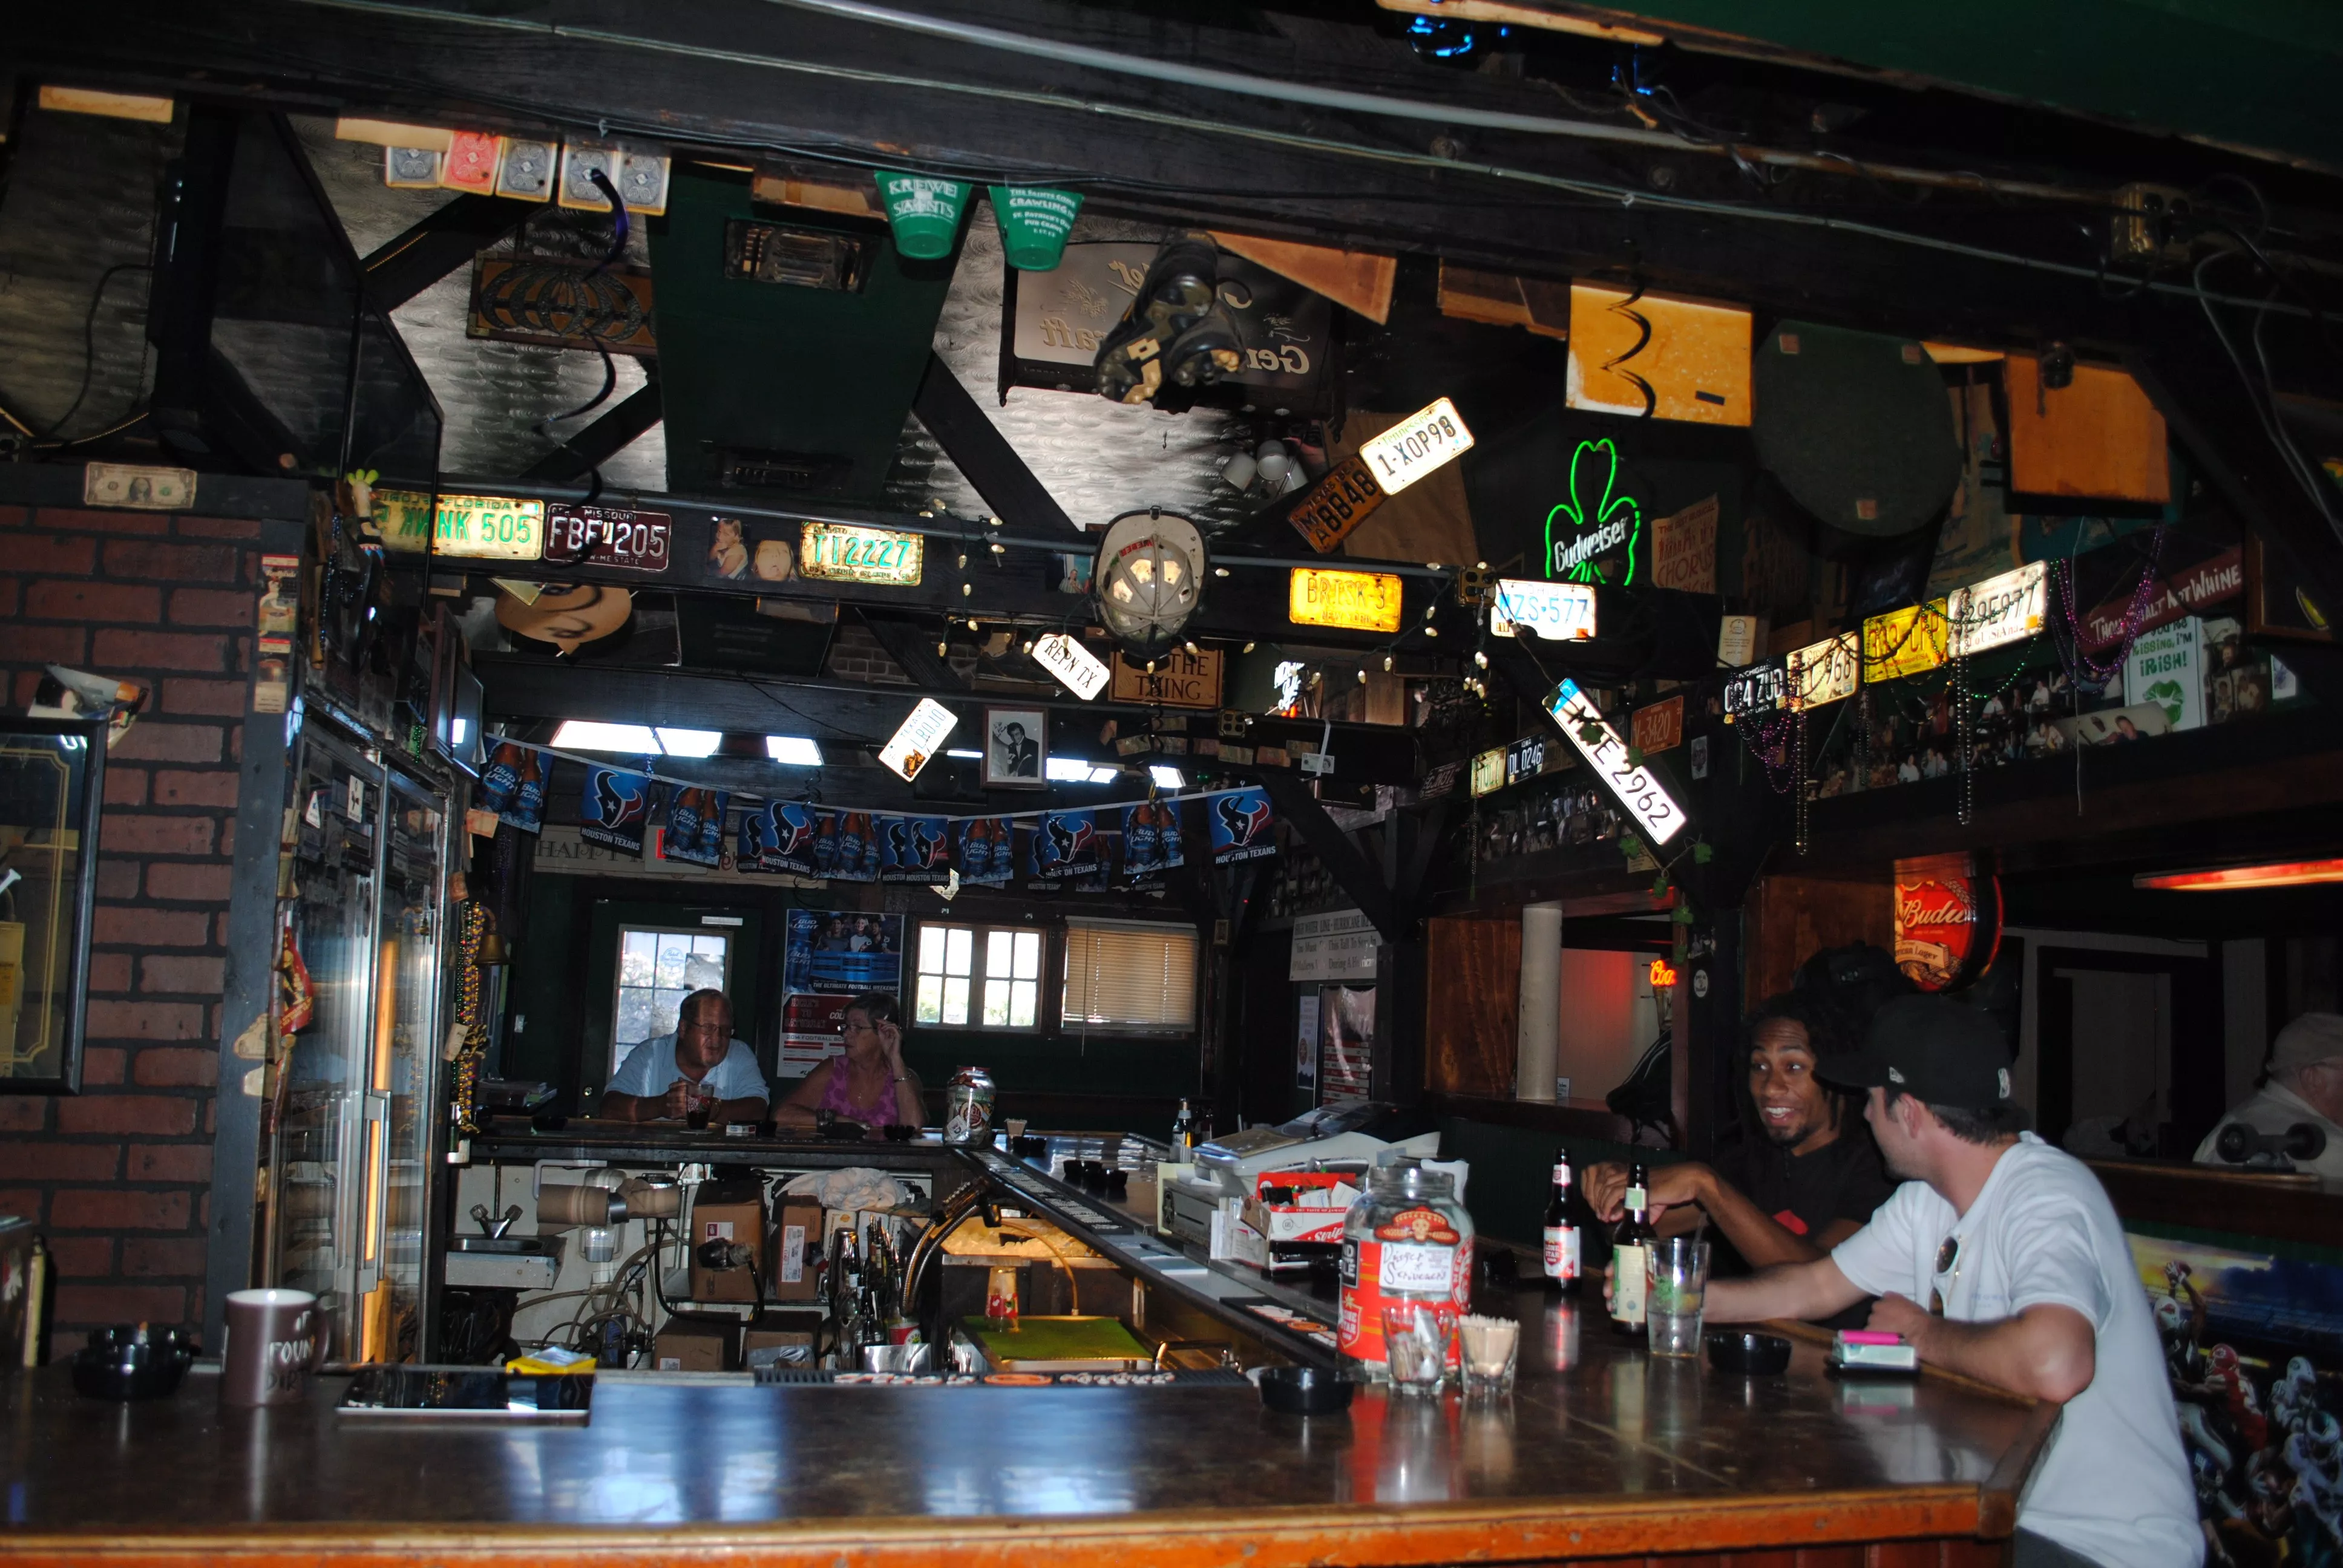 O'Malley's in Brazil, South America | Pubs & Breweries,Billiards - Rated 6.4